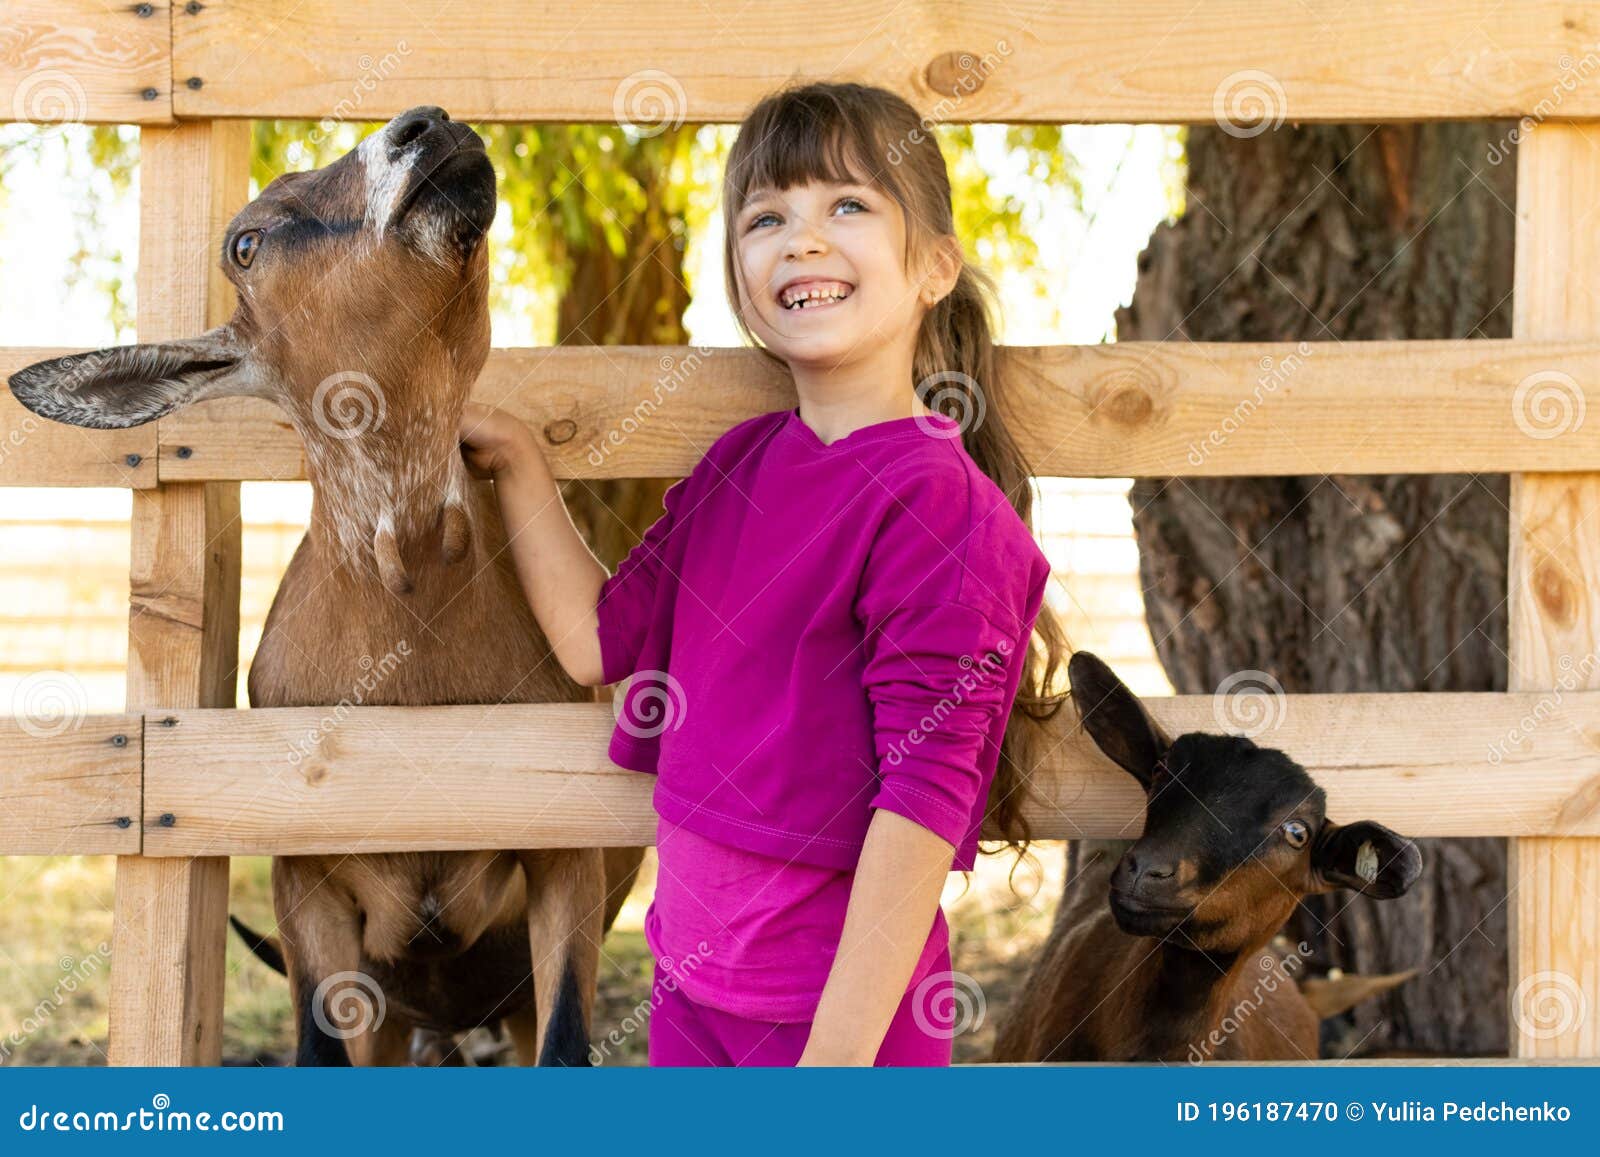 Little Kid Girl with Domestic Goat. Zoo, Farm, Love Animal Concept. Stock  Photo - Image of breed, outdoor: 196187470